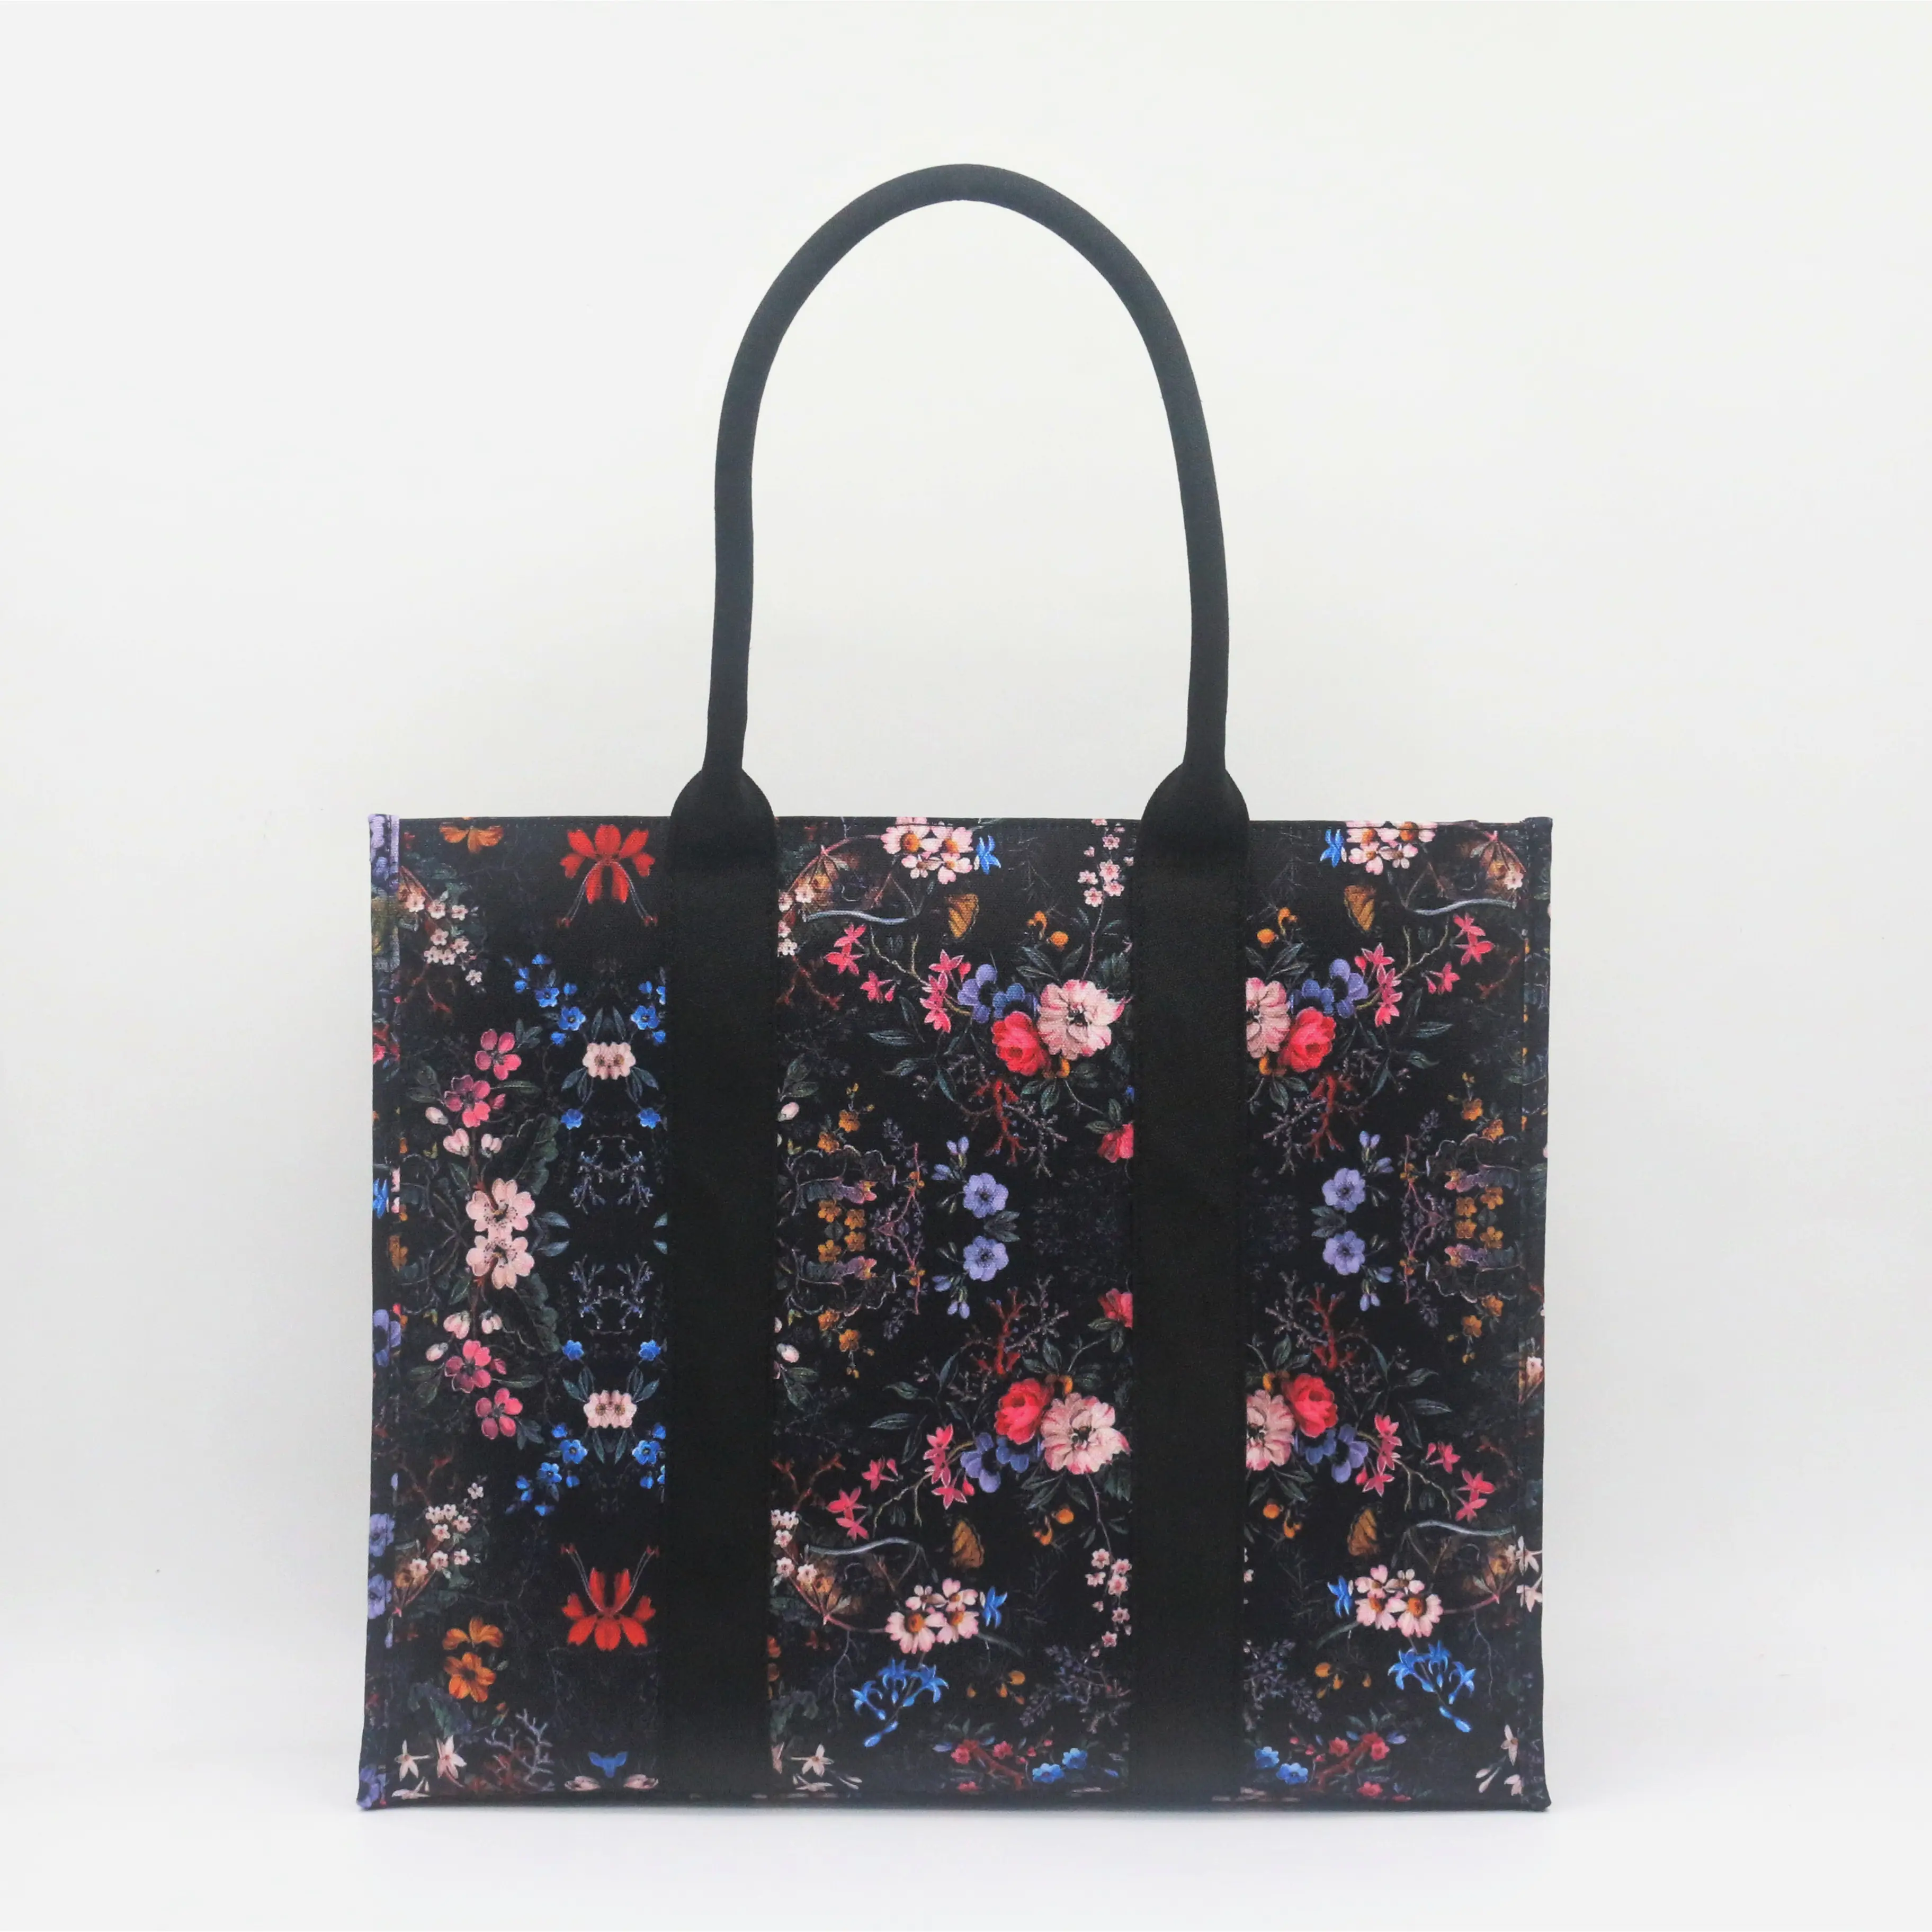 ODM Vintage Flower Pattern Eco-friendly Large Canvas Black Tote Bag Eco Holiday Gift Bags Daily Use Fashion Grocery Shopping Bag